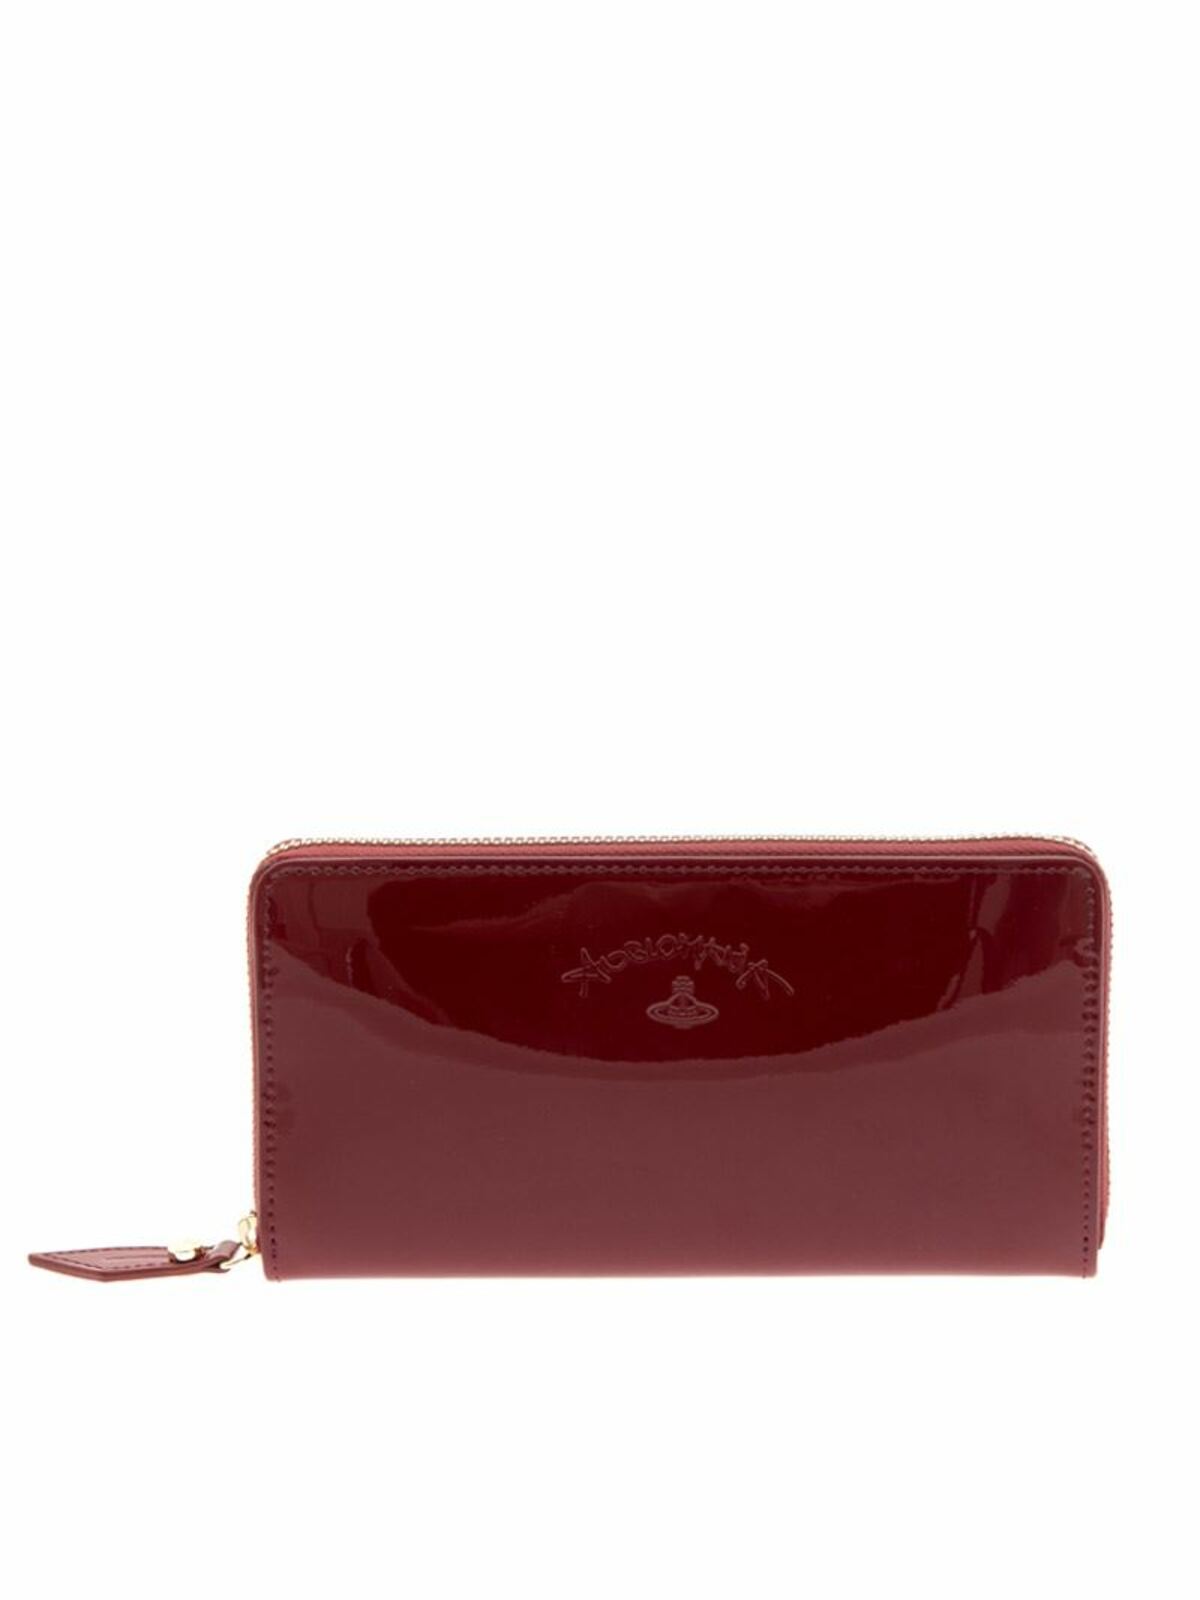 Vivienne Westwood Mini Coin Case Red | PLAYFUL